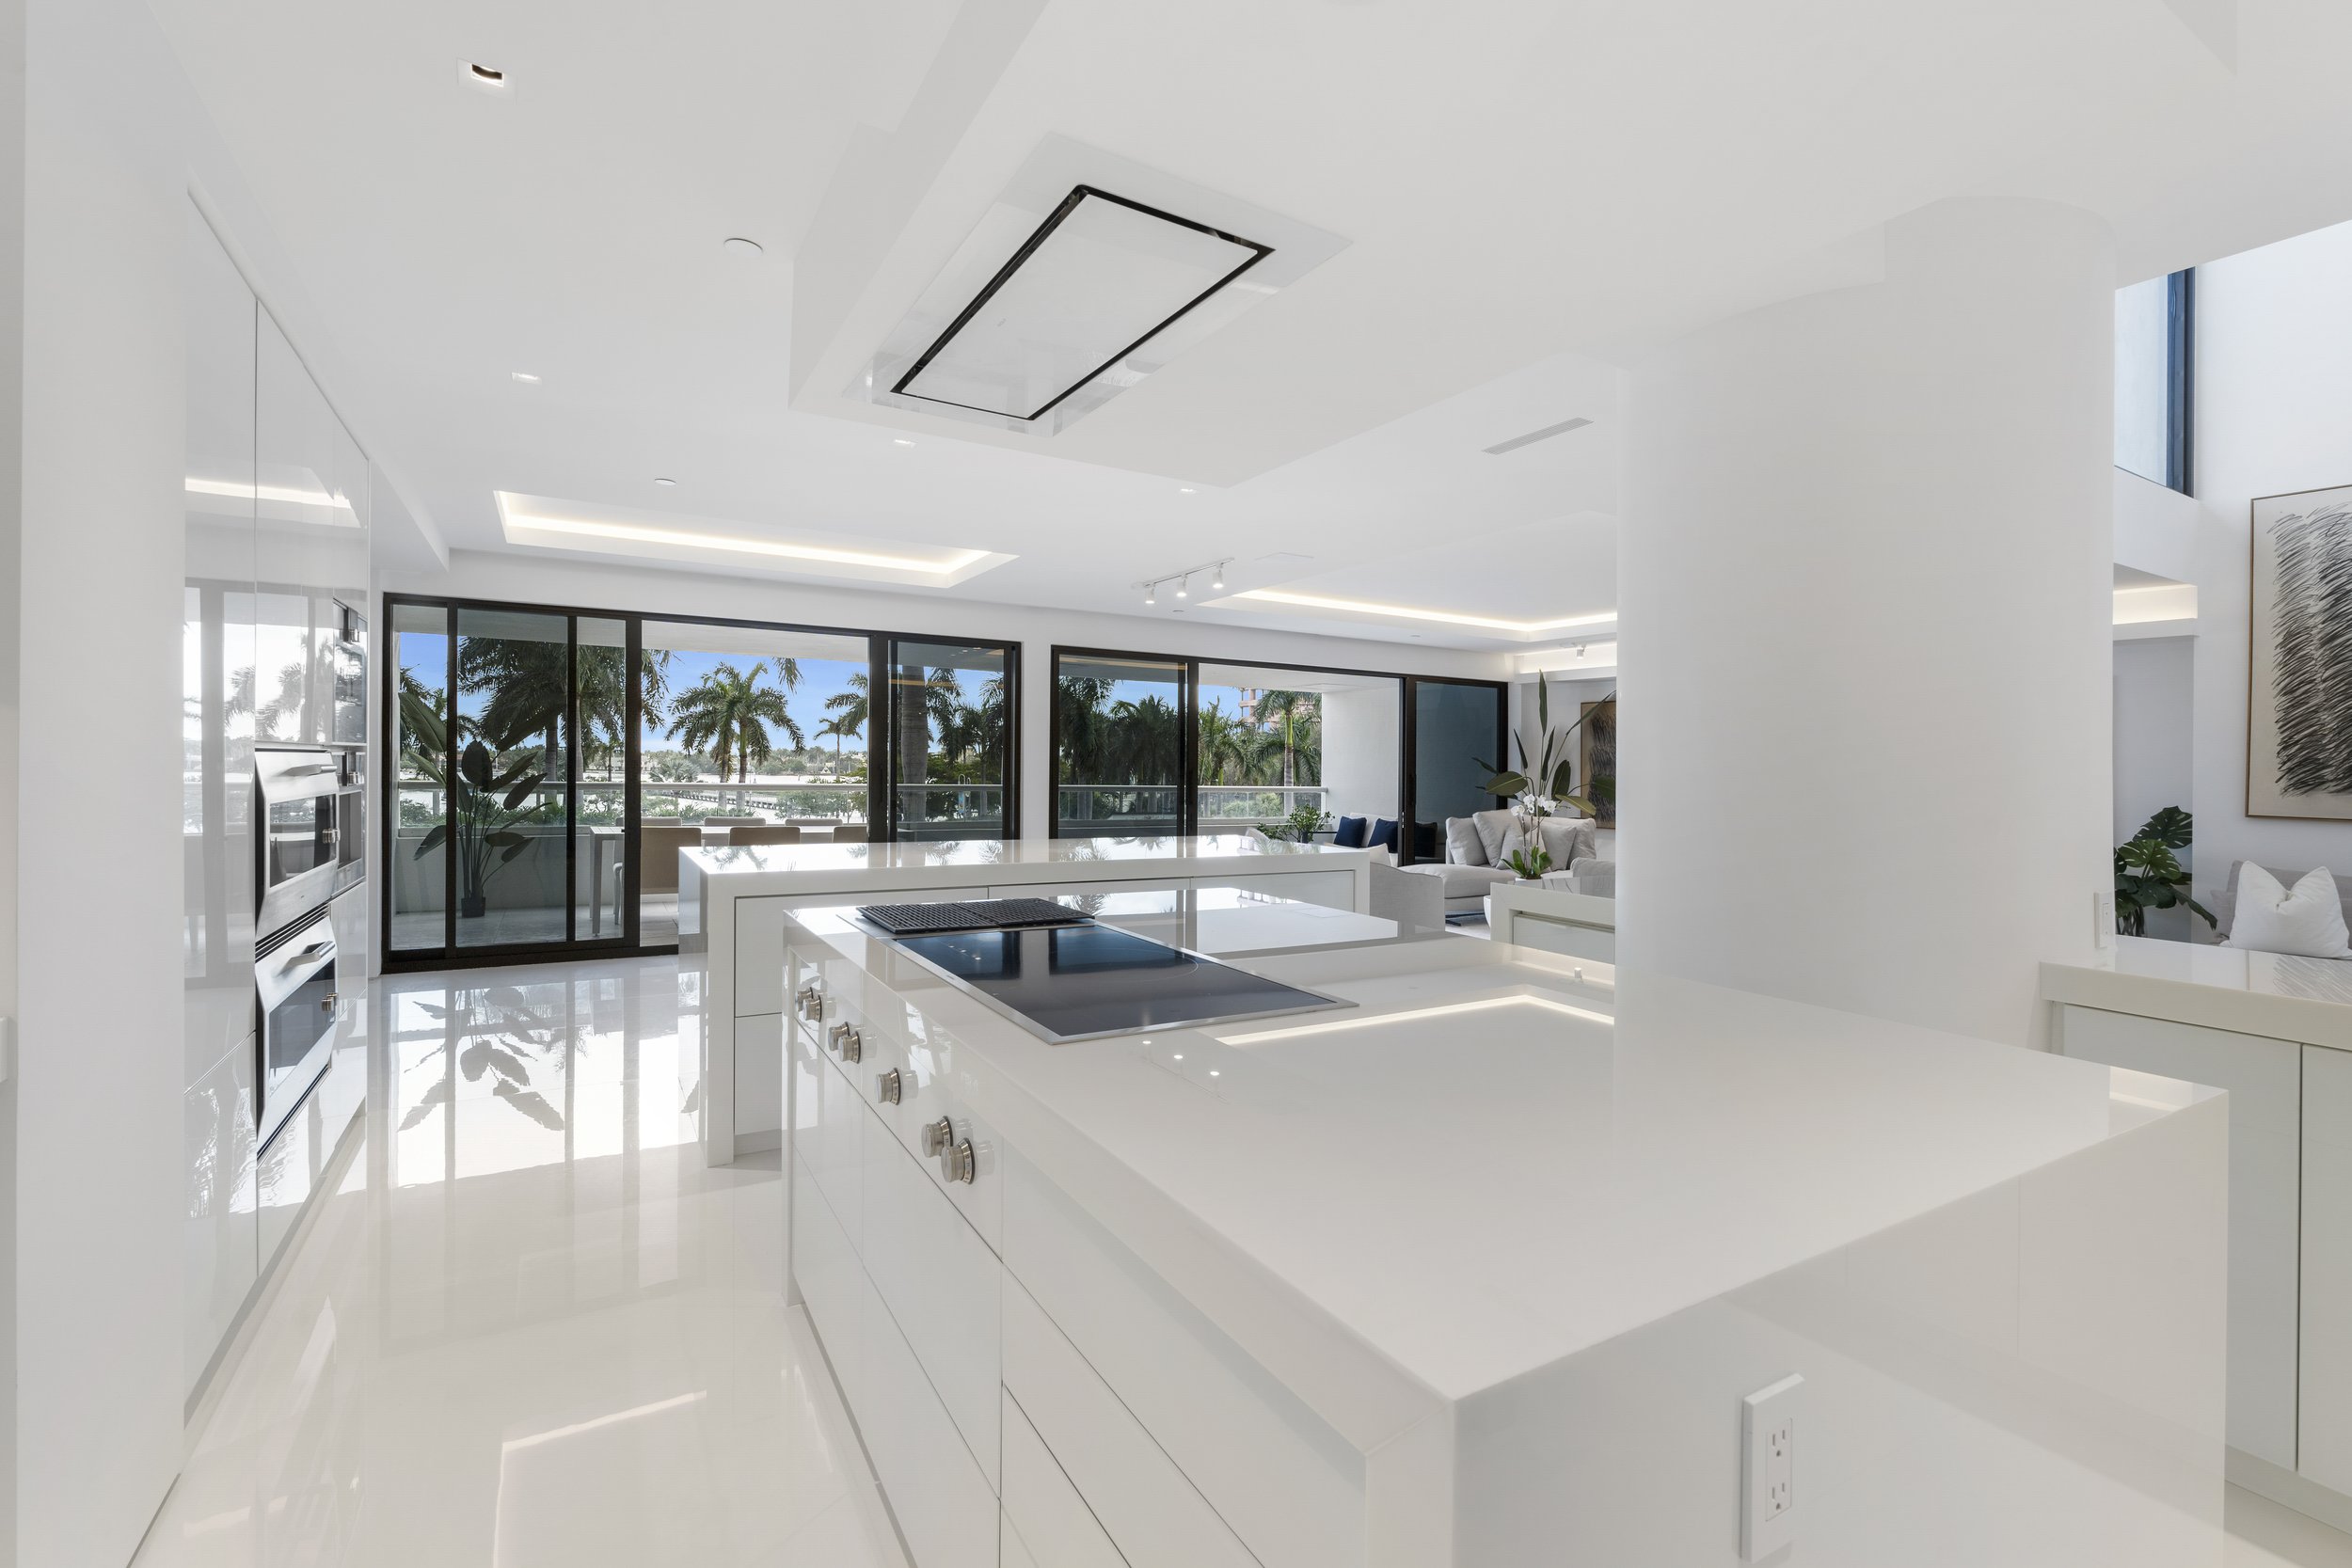 Check Out This One-Of-A-Kind West Palm Beach Designer Triplex Asking $12.95 Million 6.jpg